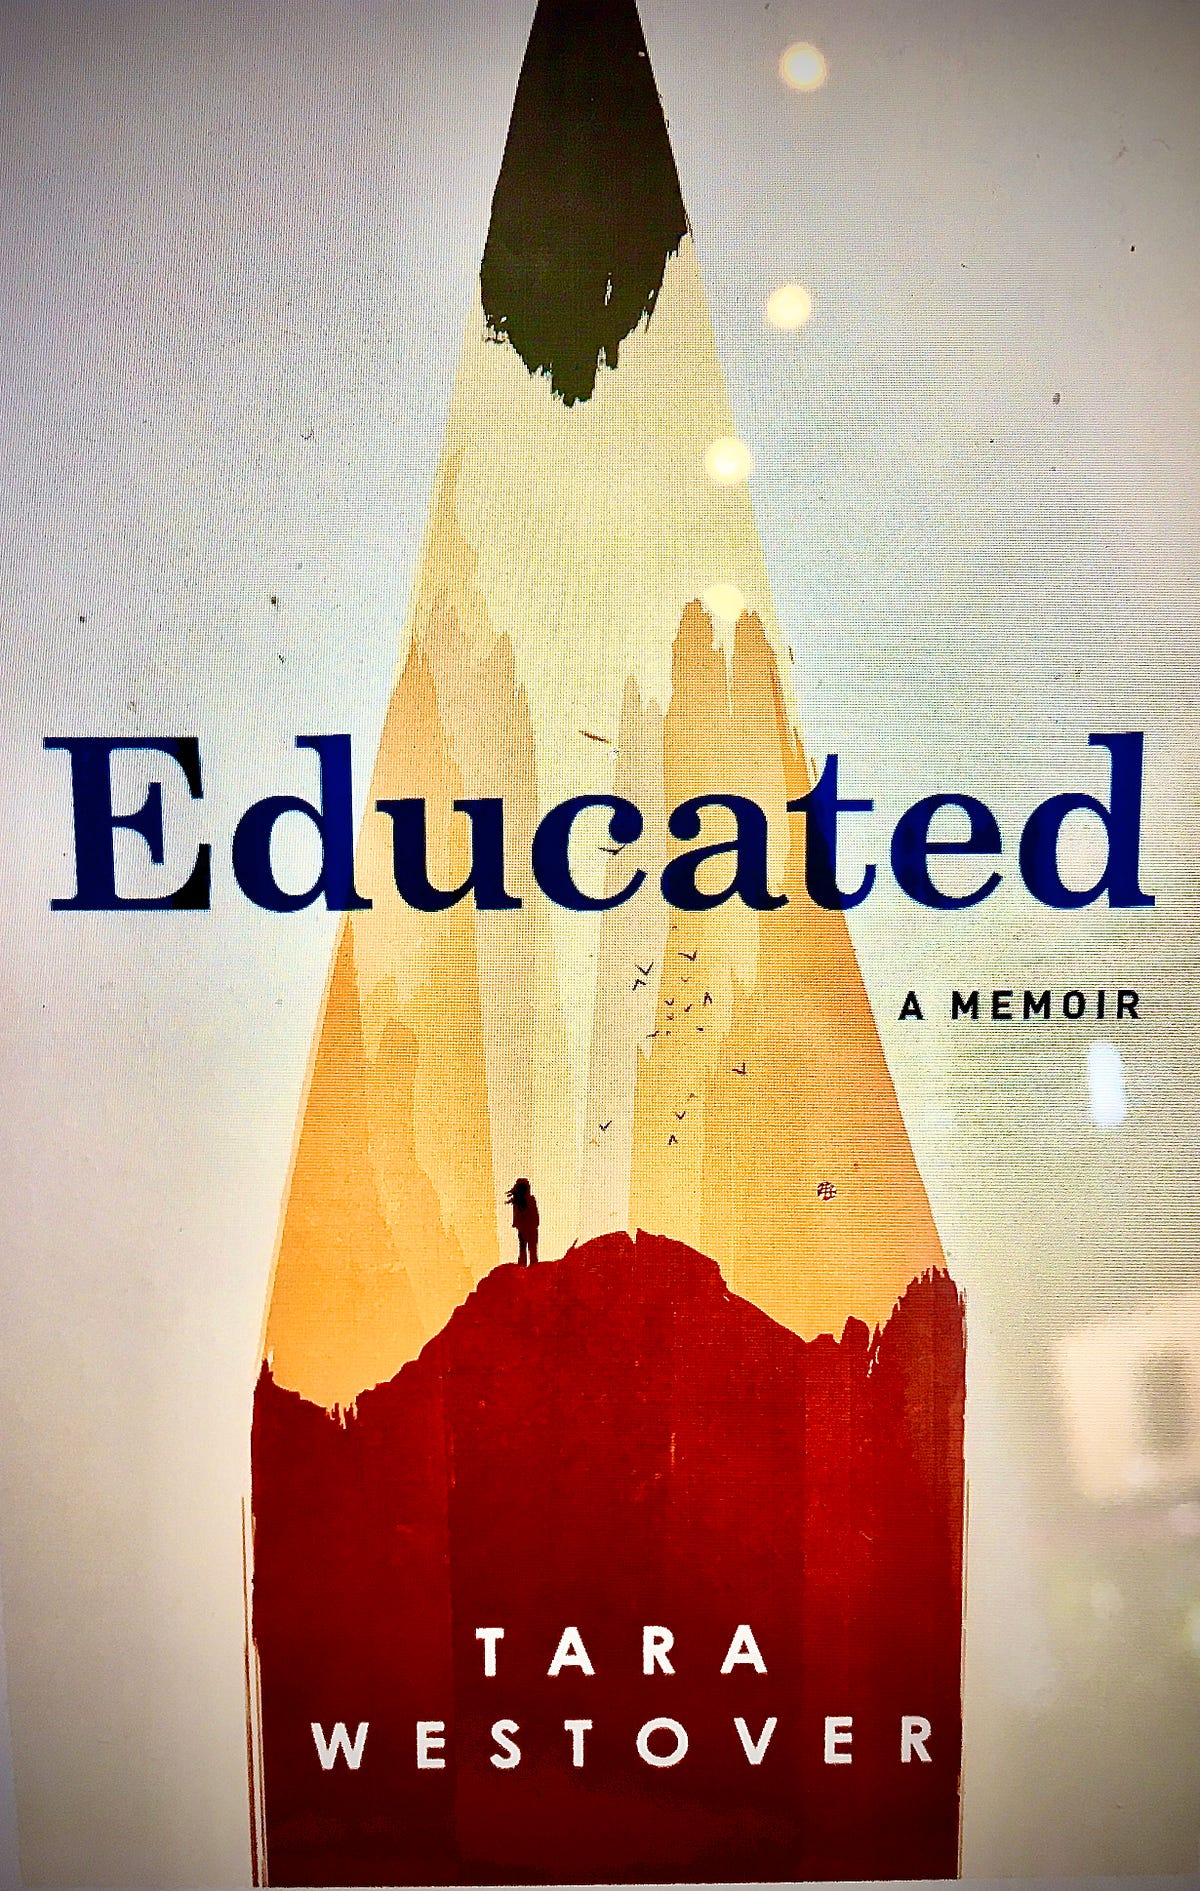 Book Review: Educated by Tara Westover | by Sukhada Gokhale | Medium